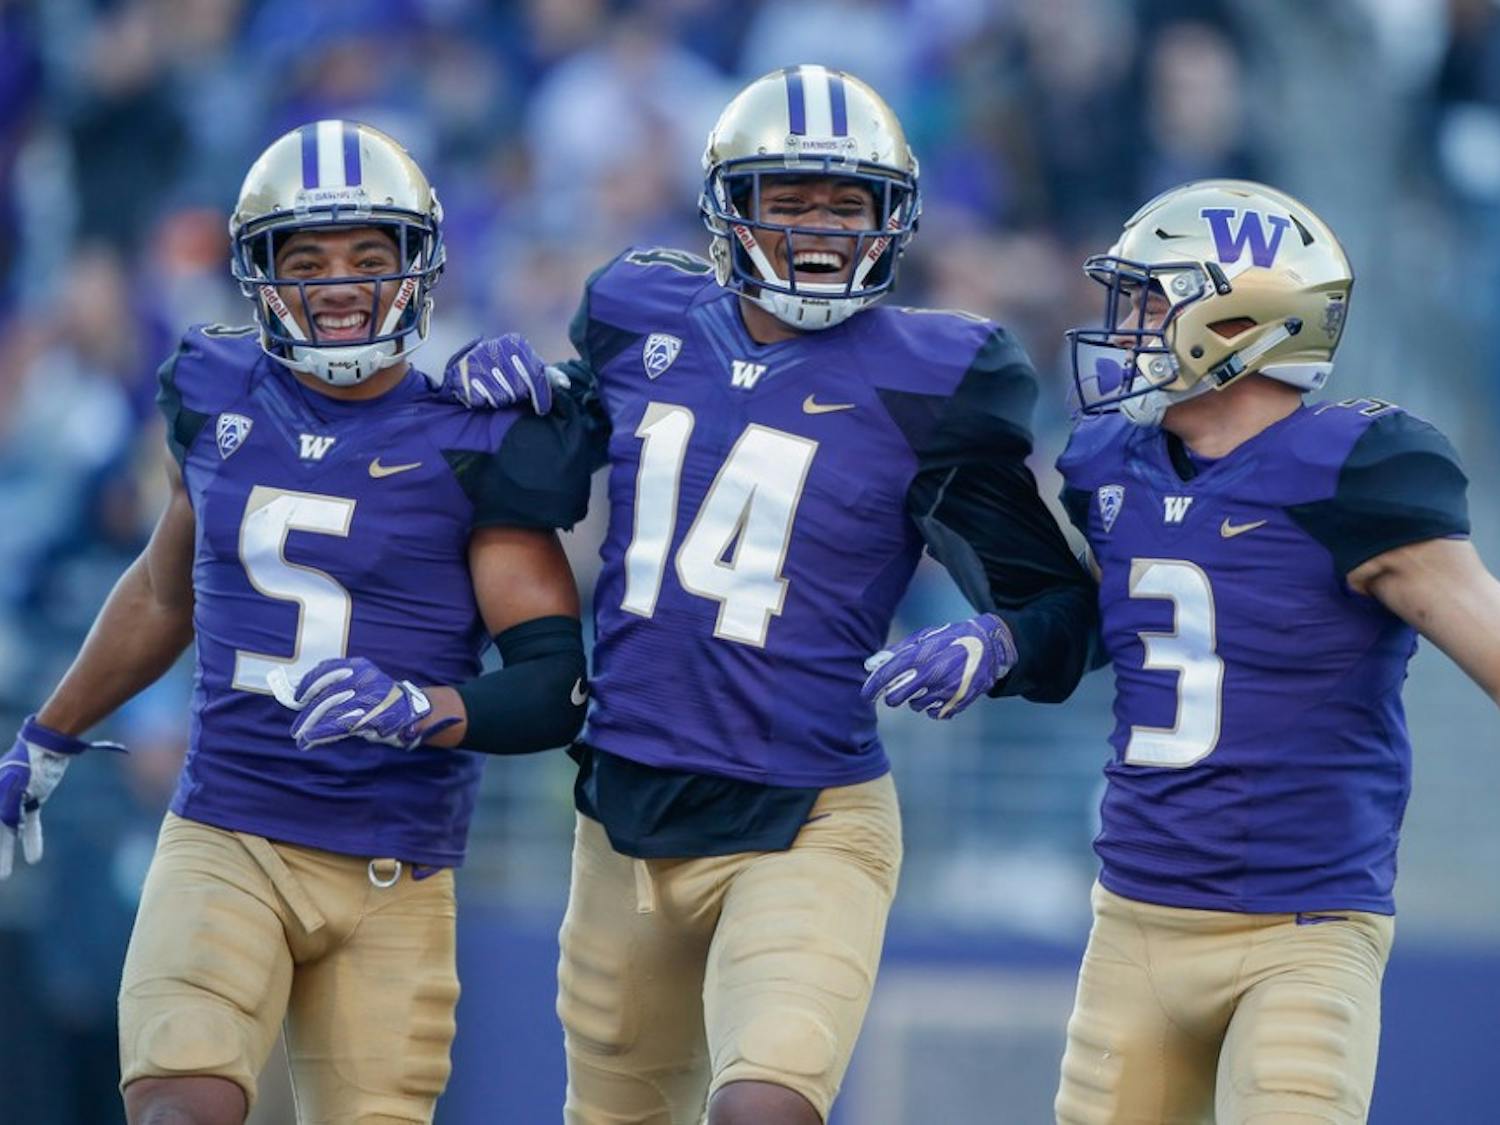 Defensive back Myles Bryant #5 of the Washington Huskies celebrates with defensive back Jojo McIntosh #14 and defensive back Elijah Molden #3 after recovering a fumble against the UCLA Bruins at Husky Stadium on October 28, 2017 in Seattle, Washington.